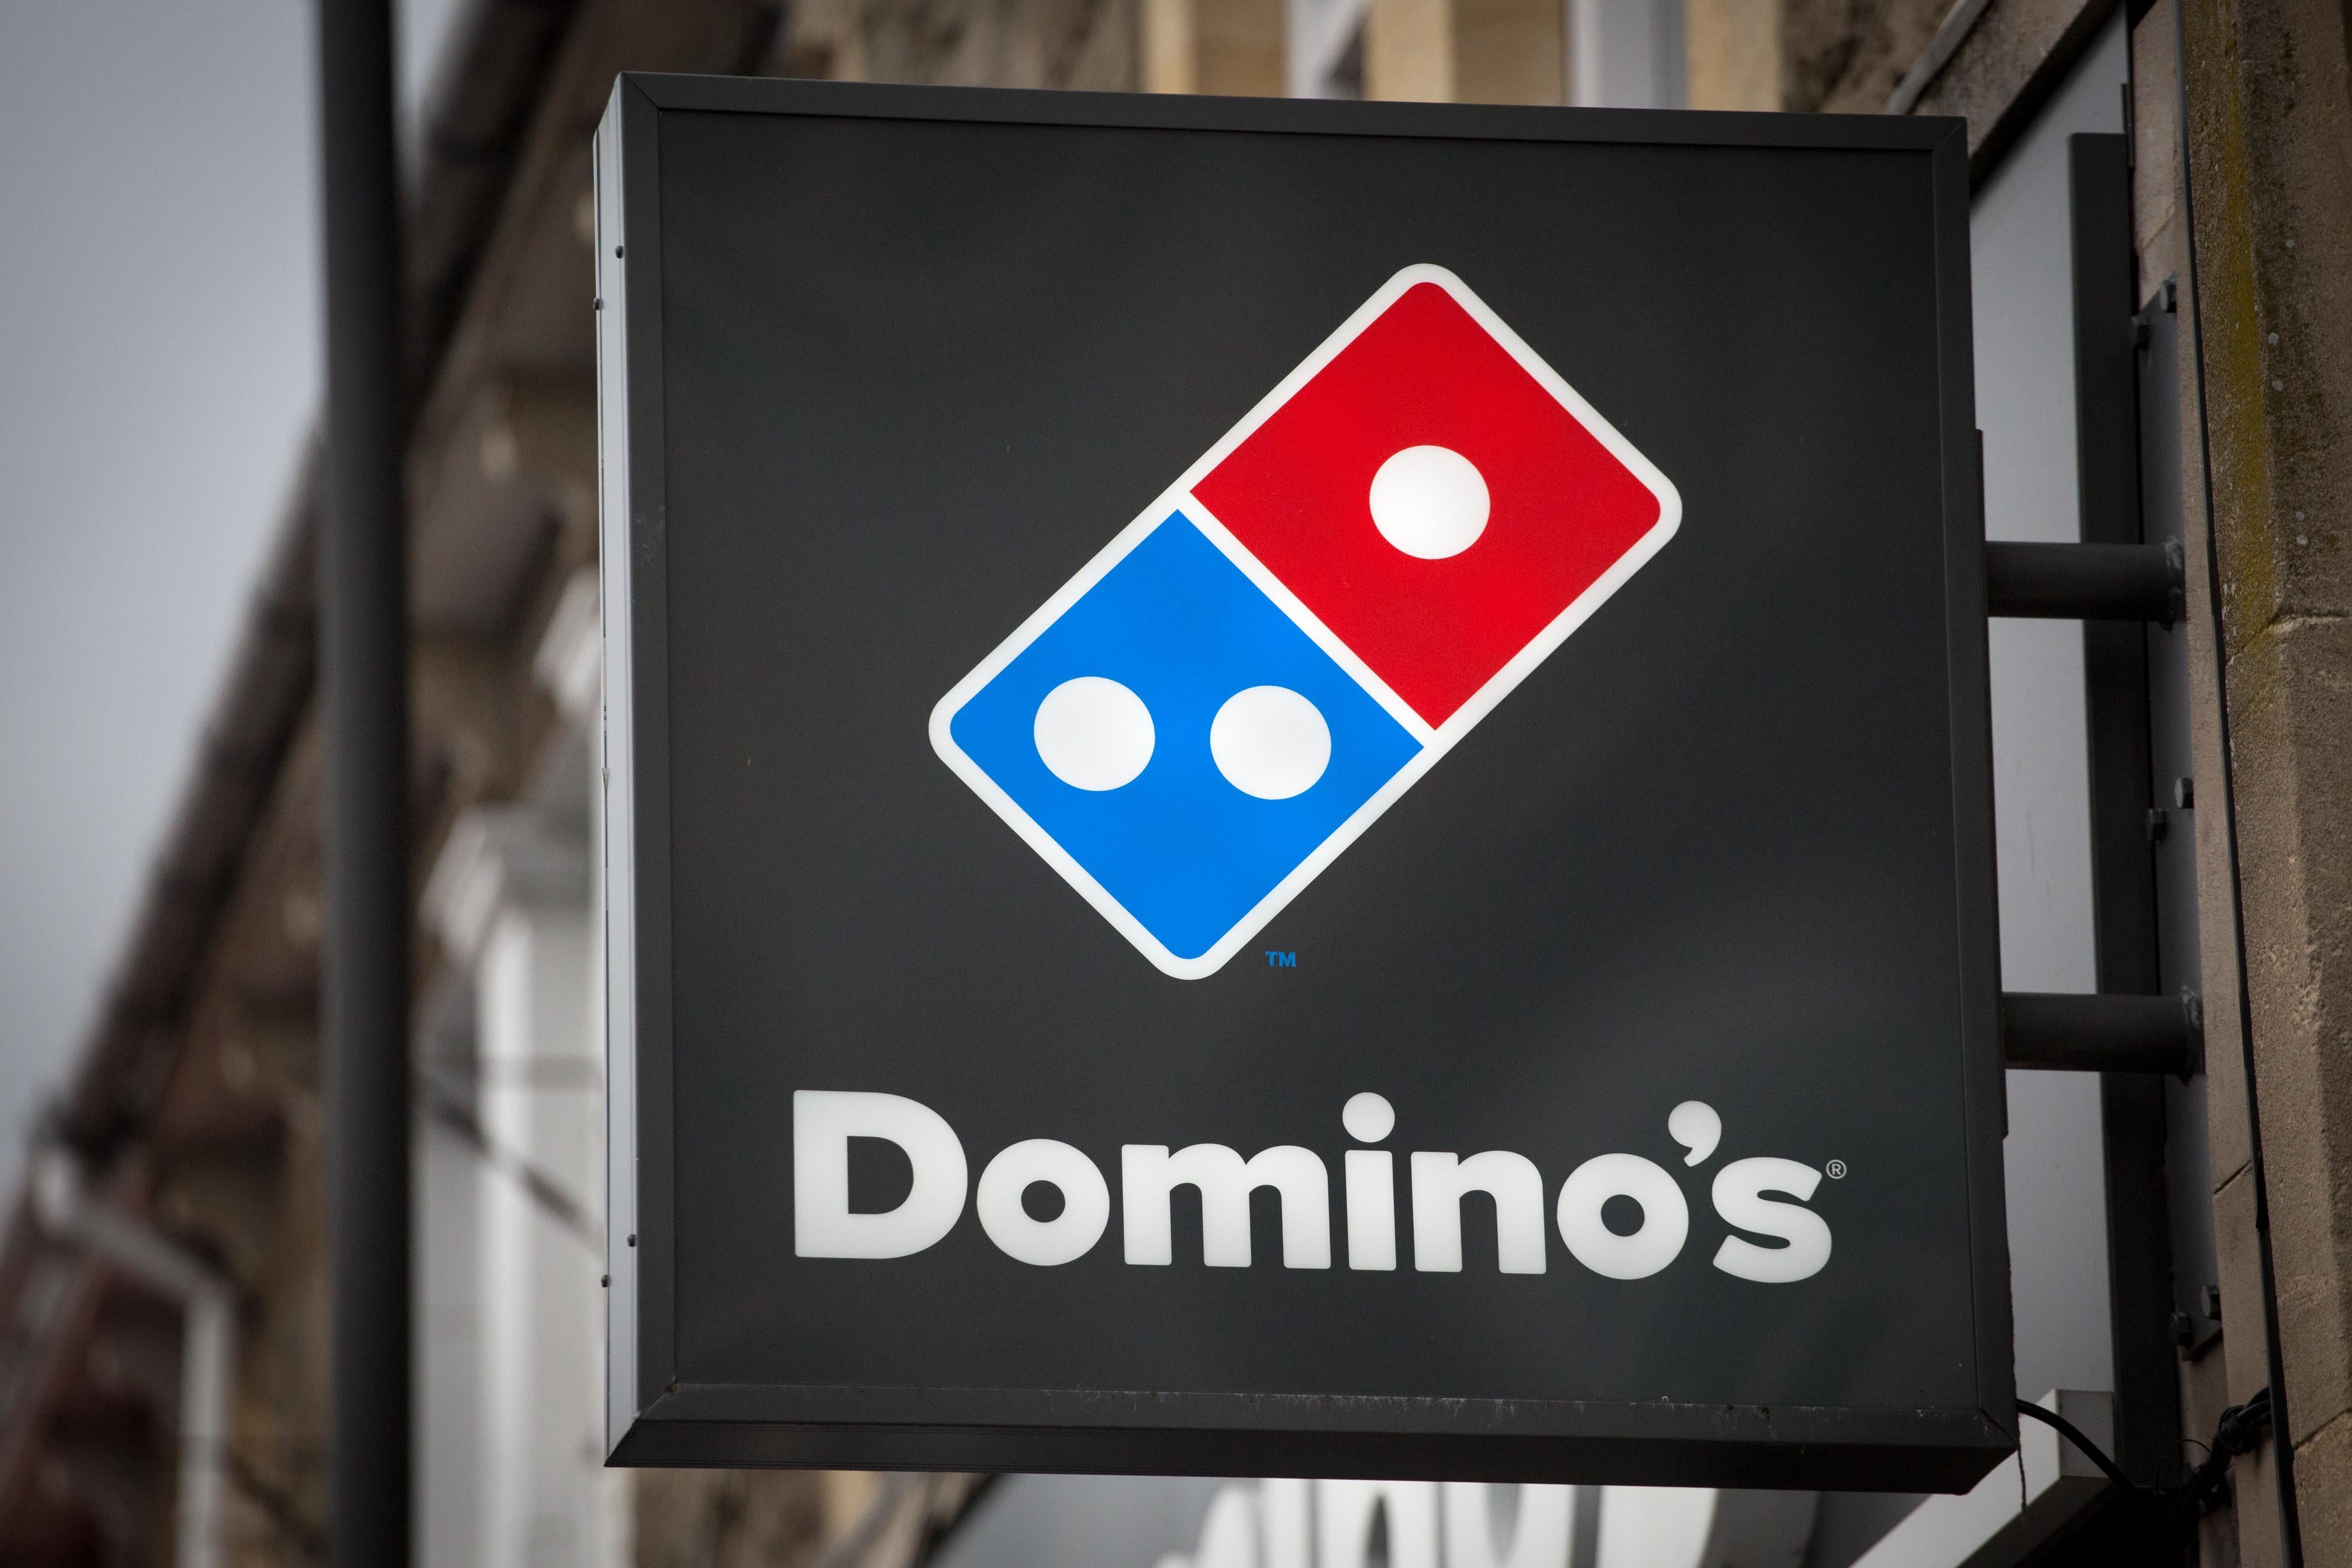 Domino's has resisted calls to make its website and app accessible to people with disabilities. 